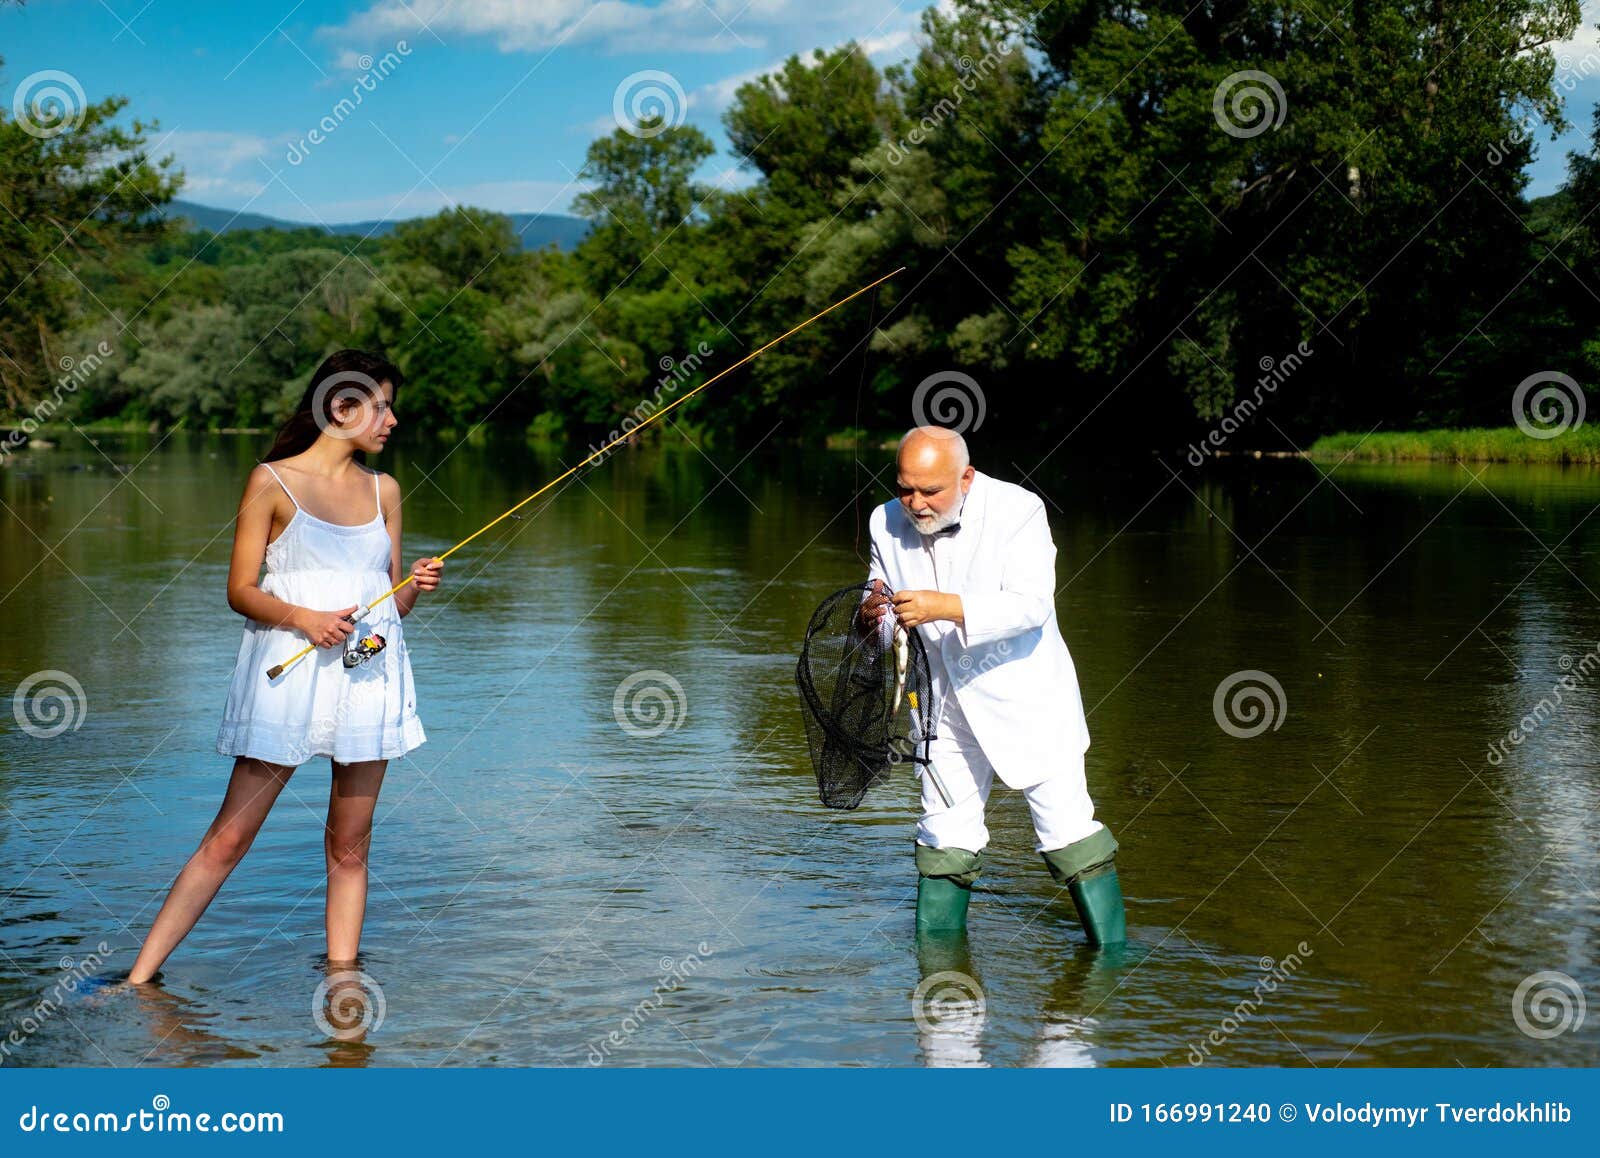 https://thumbs.dreamstime.com/z/handsome-mature-man-fishing-young-woman-white-dress-rod-net-happy-bearded-fisher-water-fisherman-formal-suit-retired-166991240.jpg